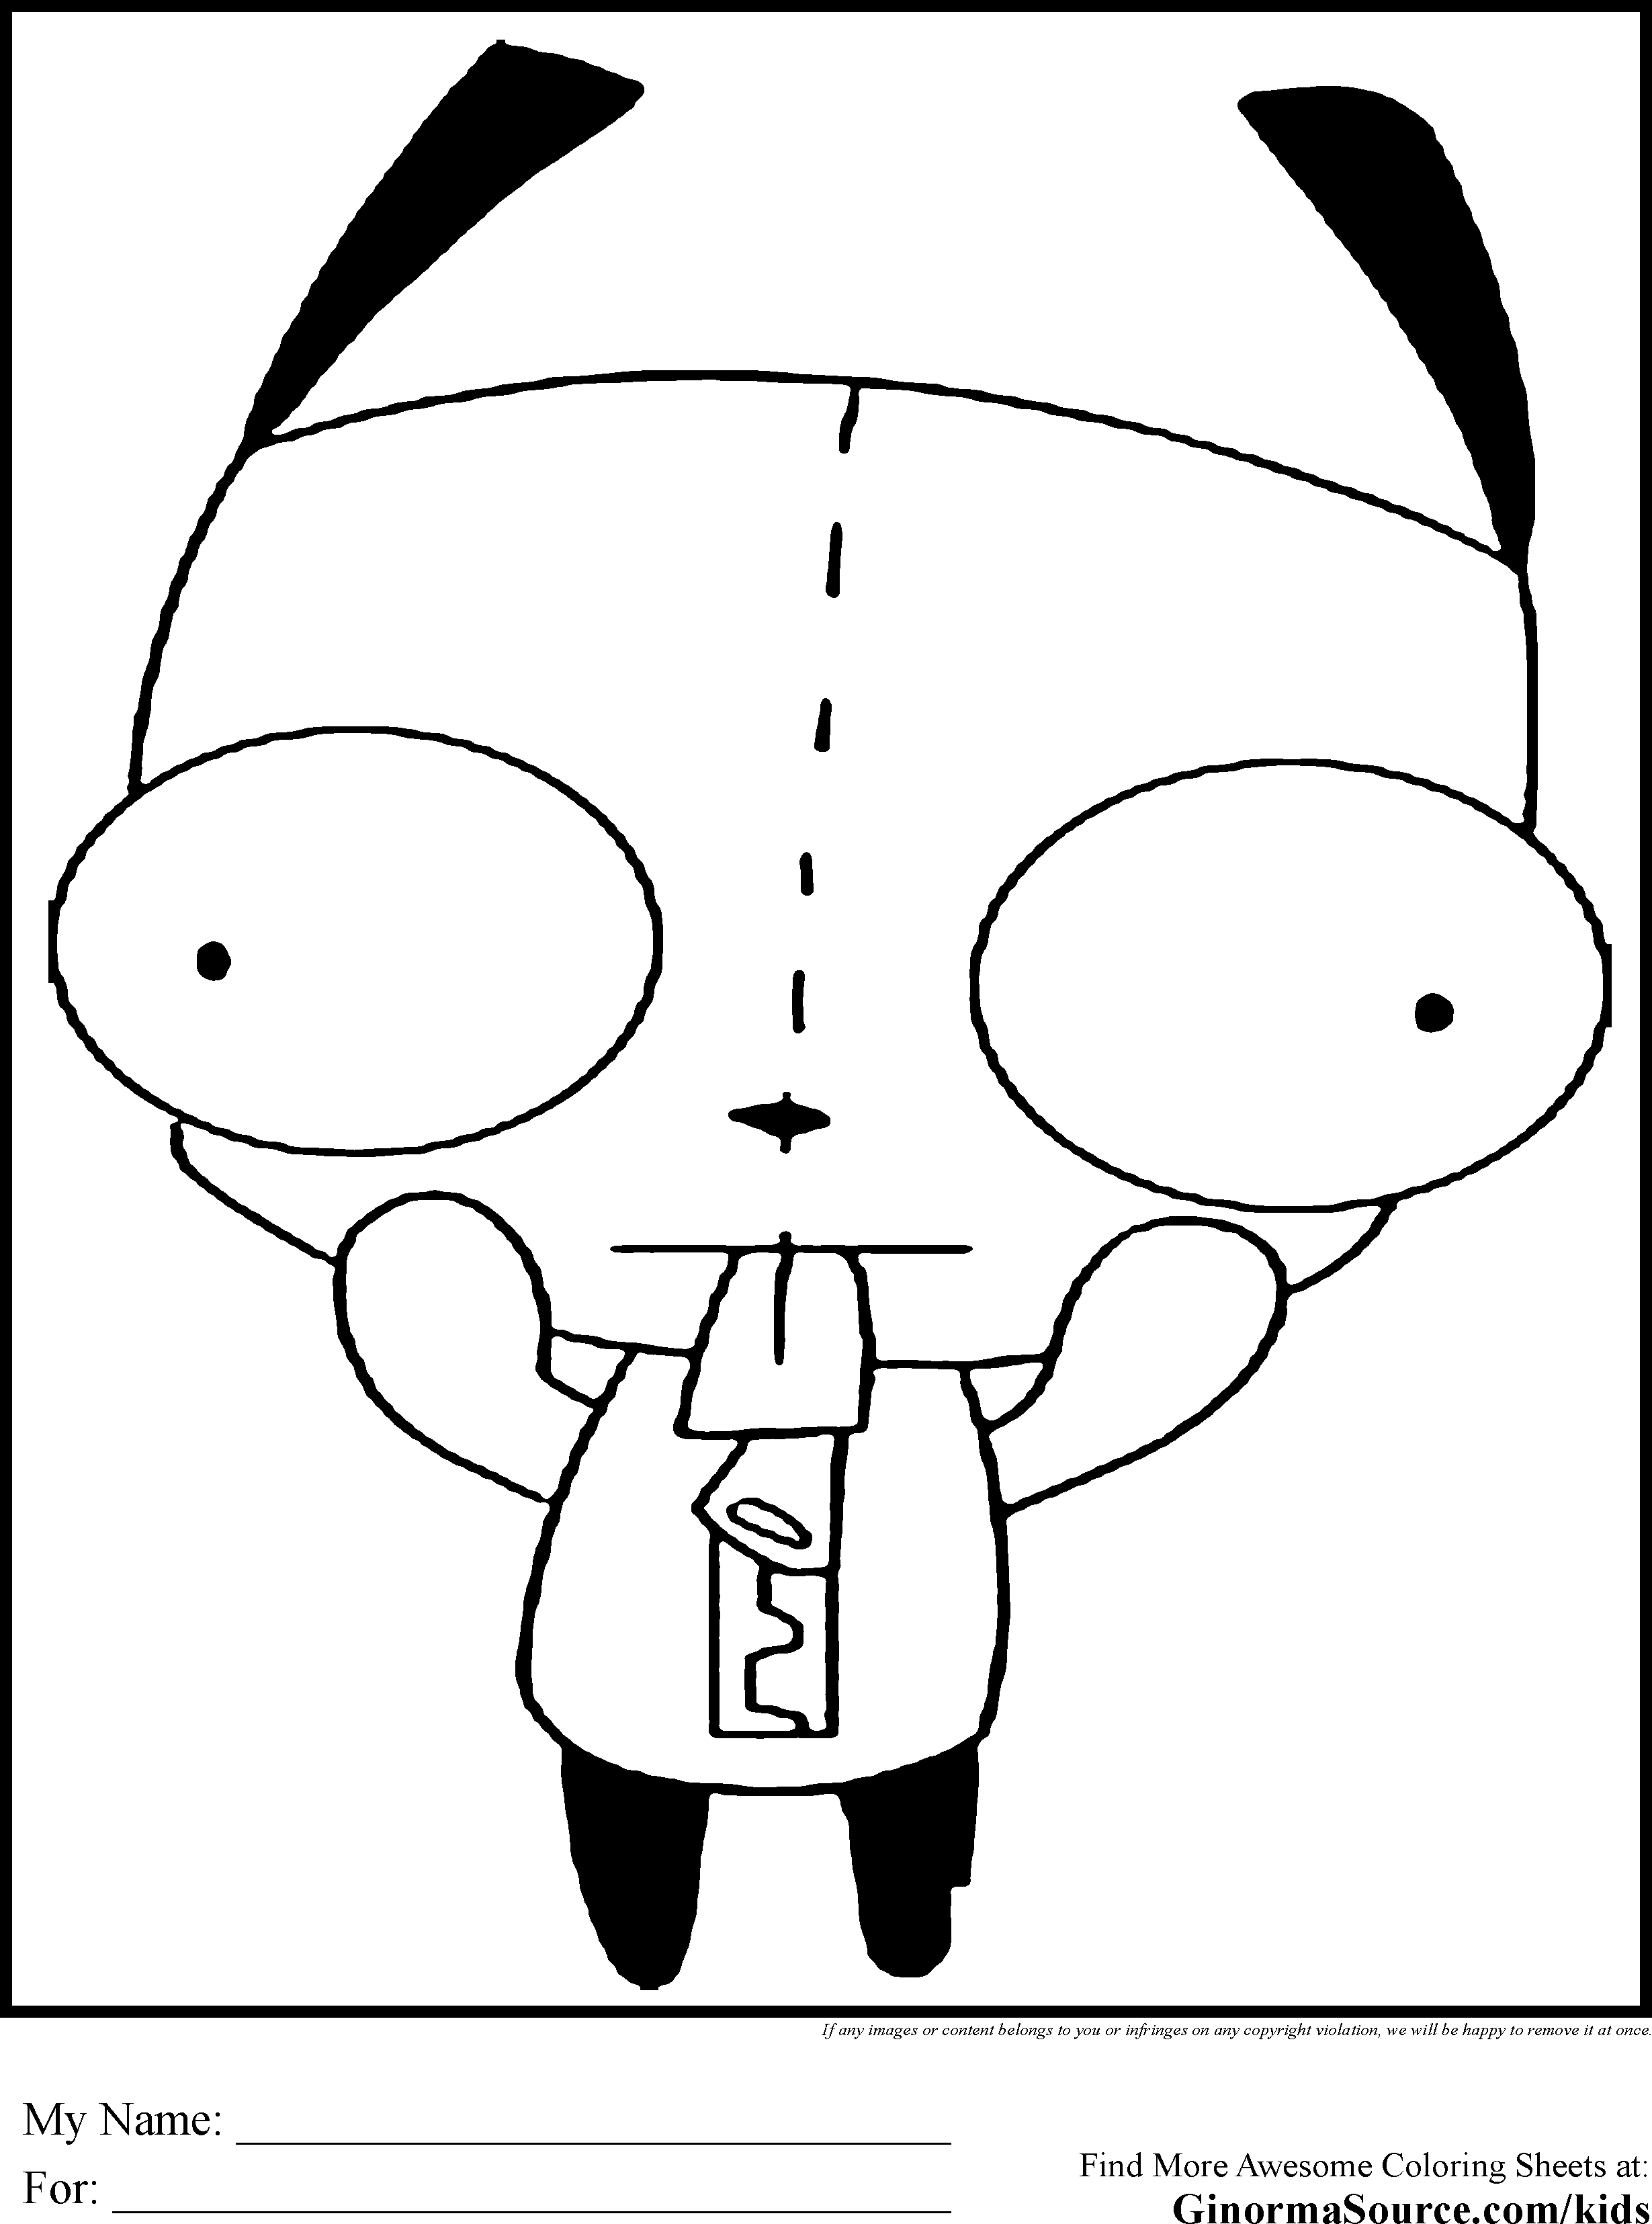 Free Printable Invader Zim Coloring Pages Great - Coloring pages